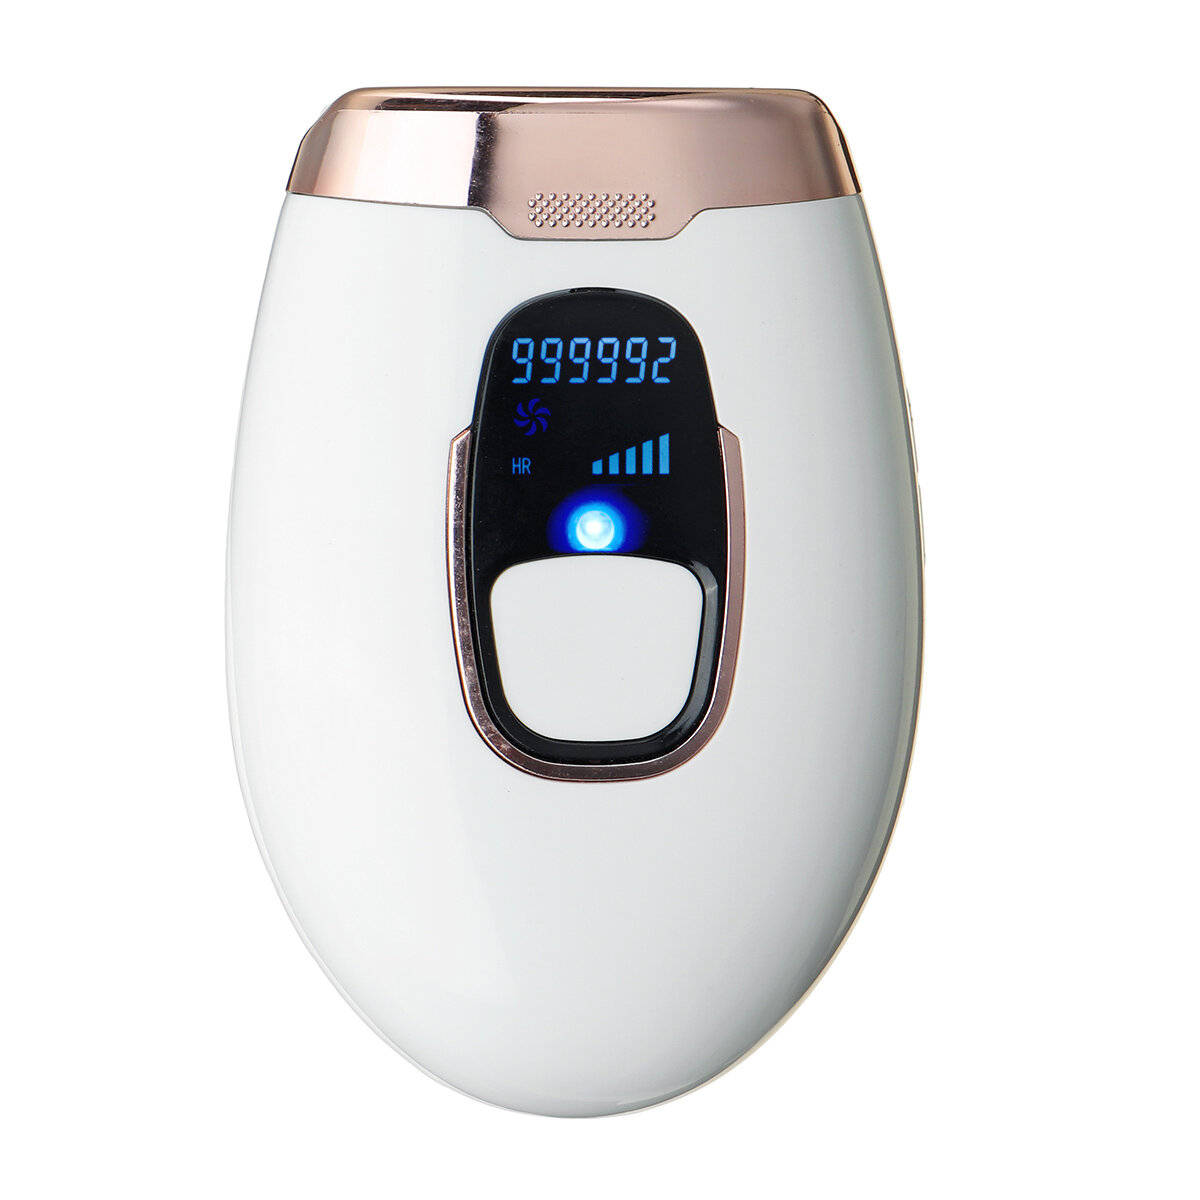 

990,000 Flashes IPL Laser Hair Removal Device Permanent LCD Women Painless Whole Body Hair Epilator Bikini Trimmer